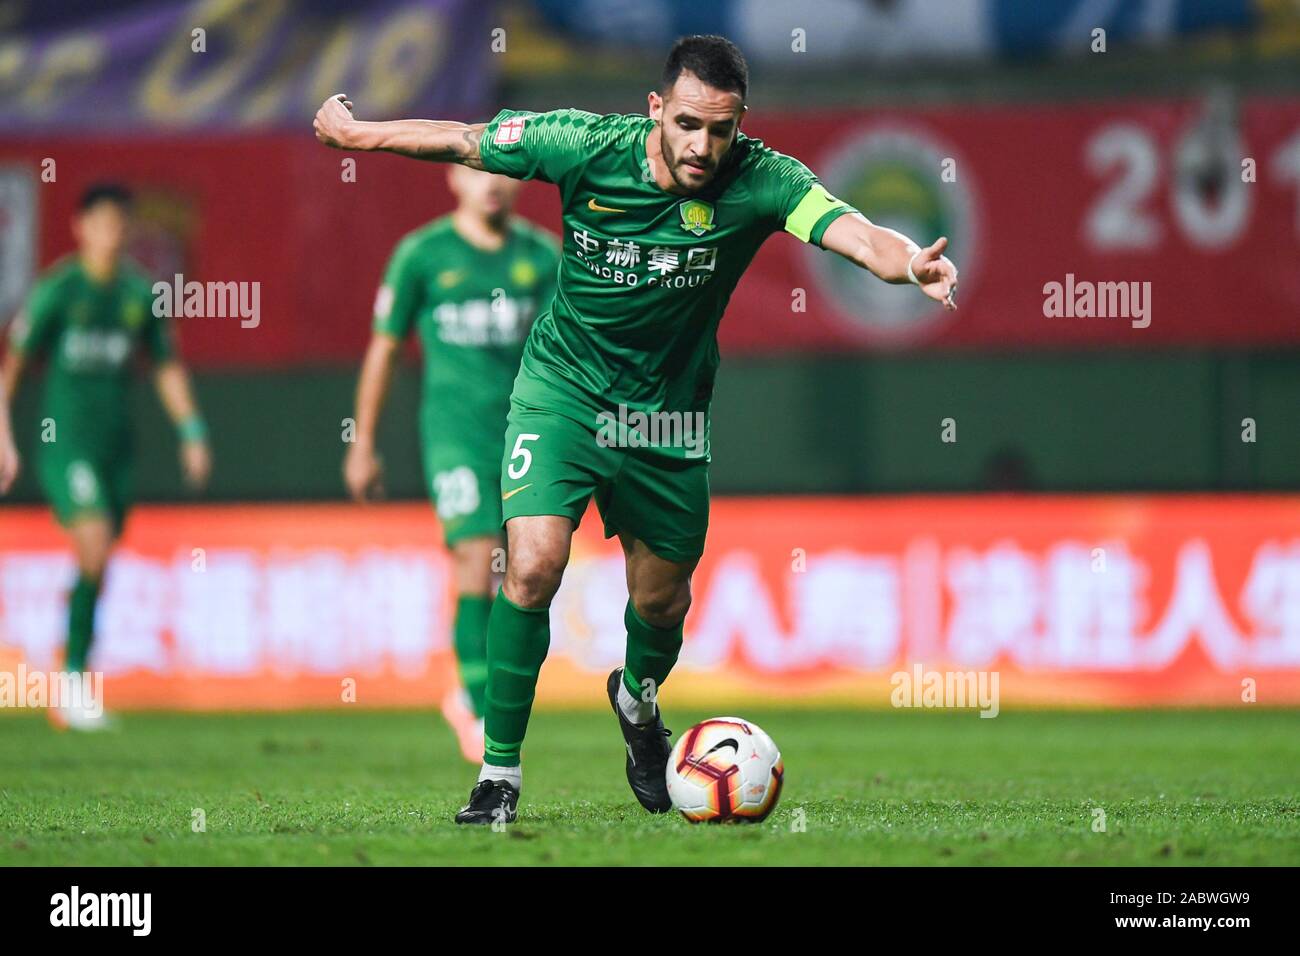 Brazilian football player Renato Soares de Oliveira Augusto, or simply Renato Augusto, of Beijing Sinobo Guoan F.C. passes the ball during the 29th round match of Chinese Football Association Super League (CSL) against Guangzhou R&F in Guangzhou city, south China's Guangdong province, 27 November 2019. Guangzhou R&F slashed by Beijing Sinobo Guoan with 1-4. Stock Photo